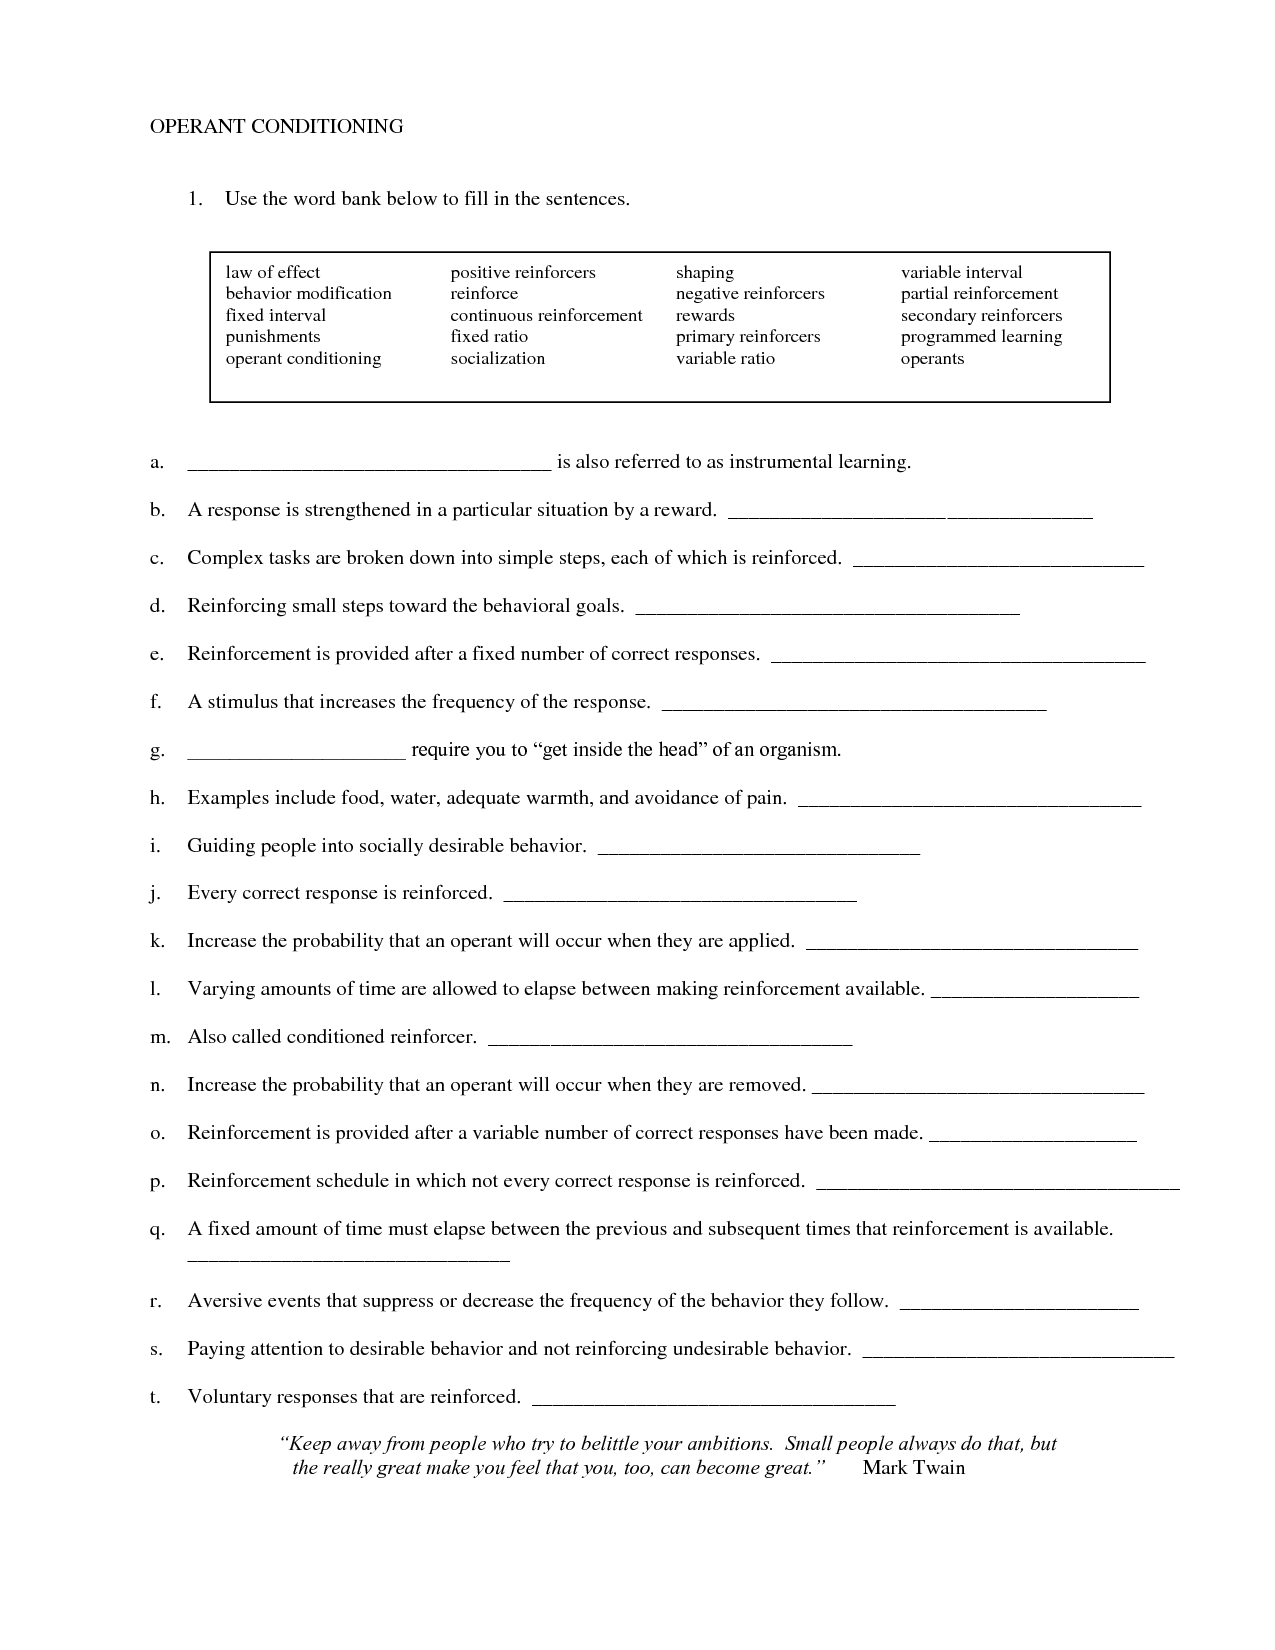 11-best-images-of-self-responsibility-worksheets-my-qualities-social-skills-worksheets